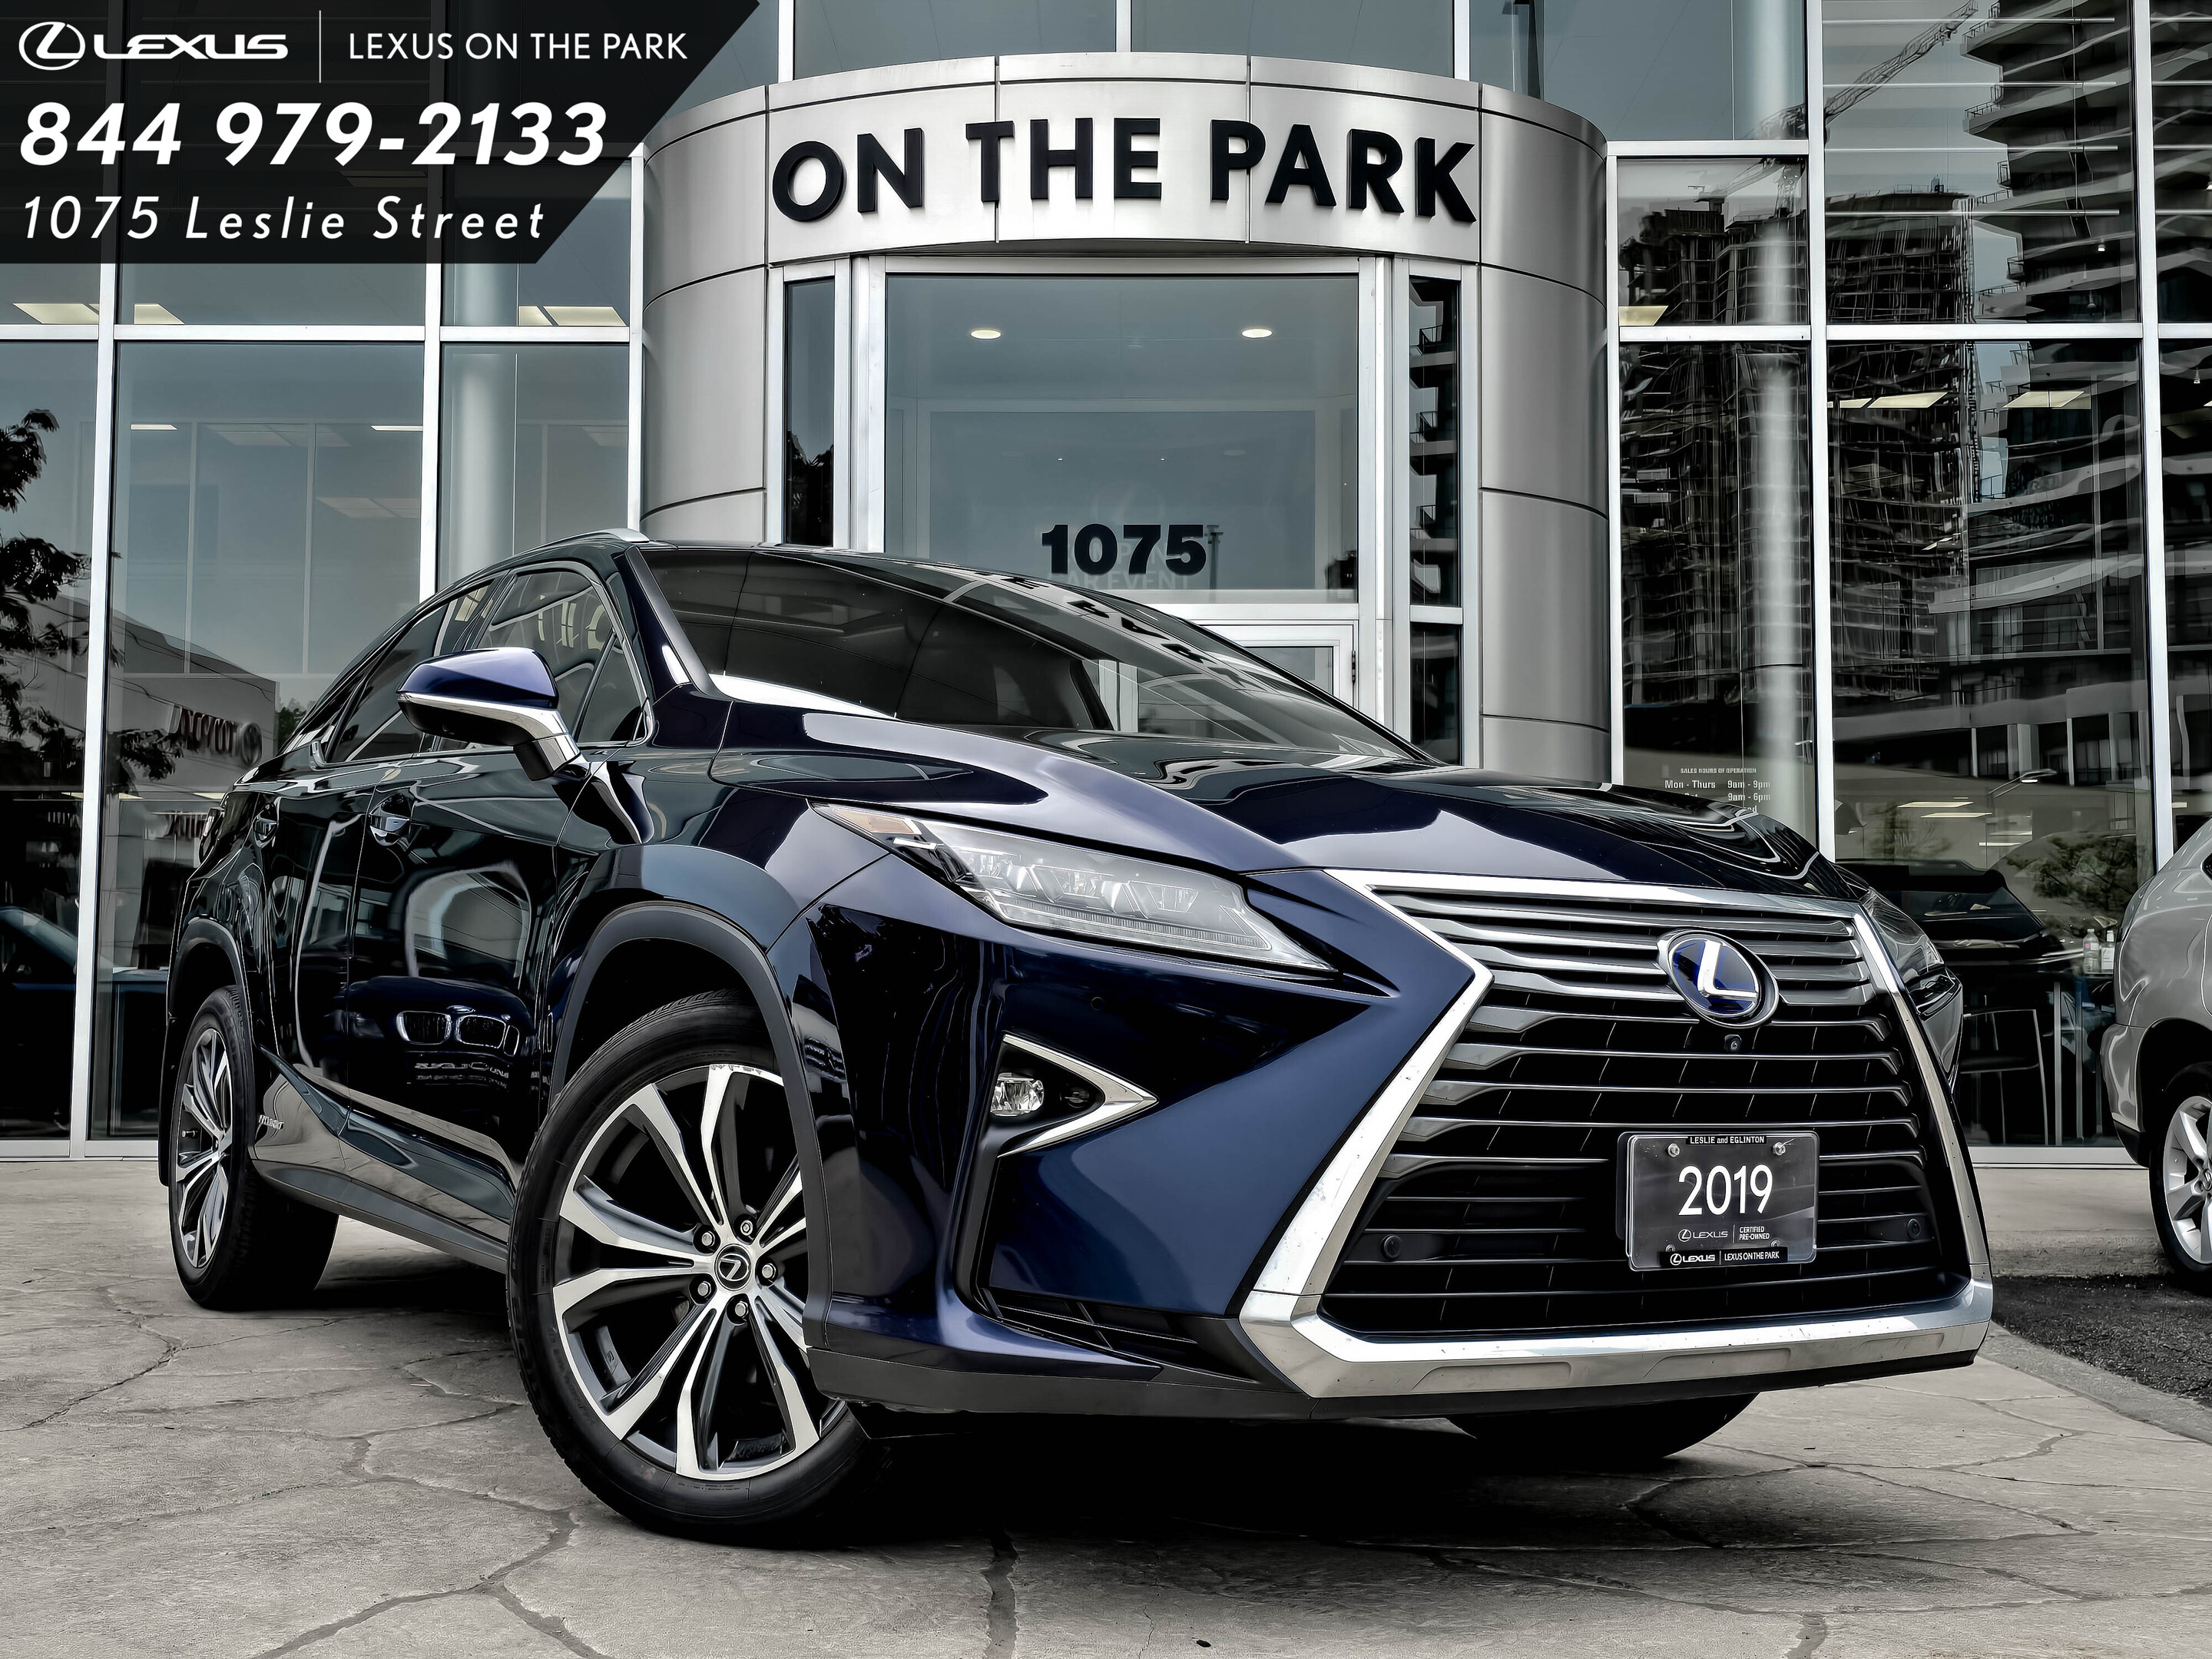 2019 Lexus RX 450H Executive Pkg|Safety Certified|Welcome Trades|